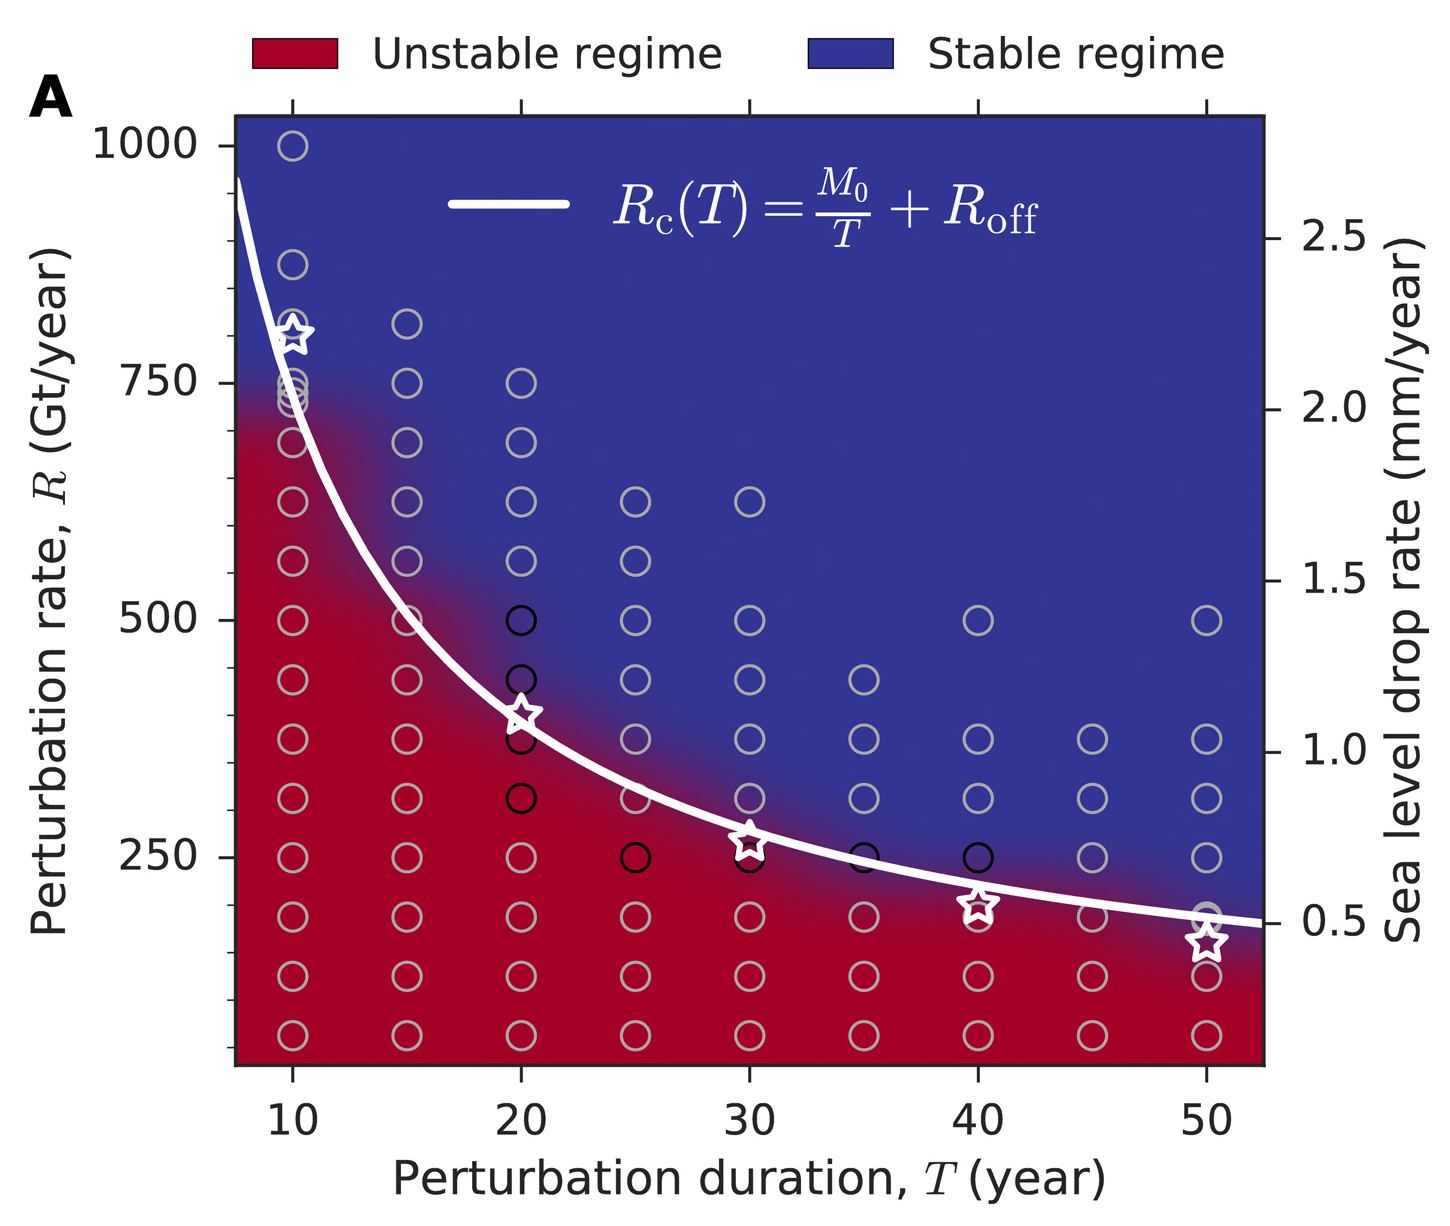 Stability diagram of the West Antarctic Ice Sheet (WAIS), rate R versus duration T of mass addition with unstable regime in red and stable regime in blue. Interpolation of the field is based on the conducted ensemble of stabilization experiments (gray circles). The critical threshold Rc (white curve) of stabilization is approximated by function given at the top right corner. White stars highlight simulations that share the same total amount of deposited mass (M = 8000 Gt), added at differing rate and duration, showing that the combination of both determines potential stabilization. Graphic: Feldmann, et al., 2019 / Science Advances